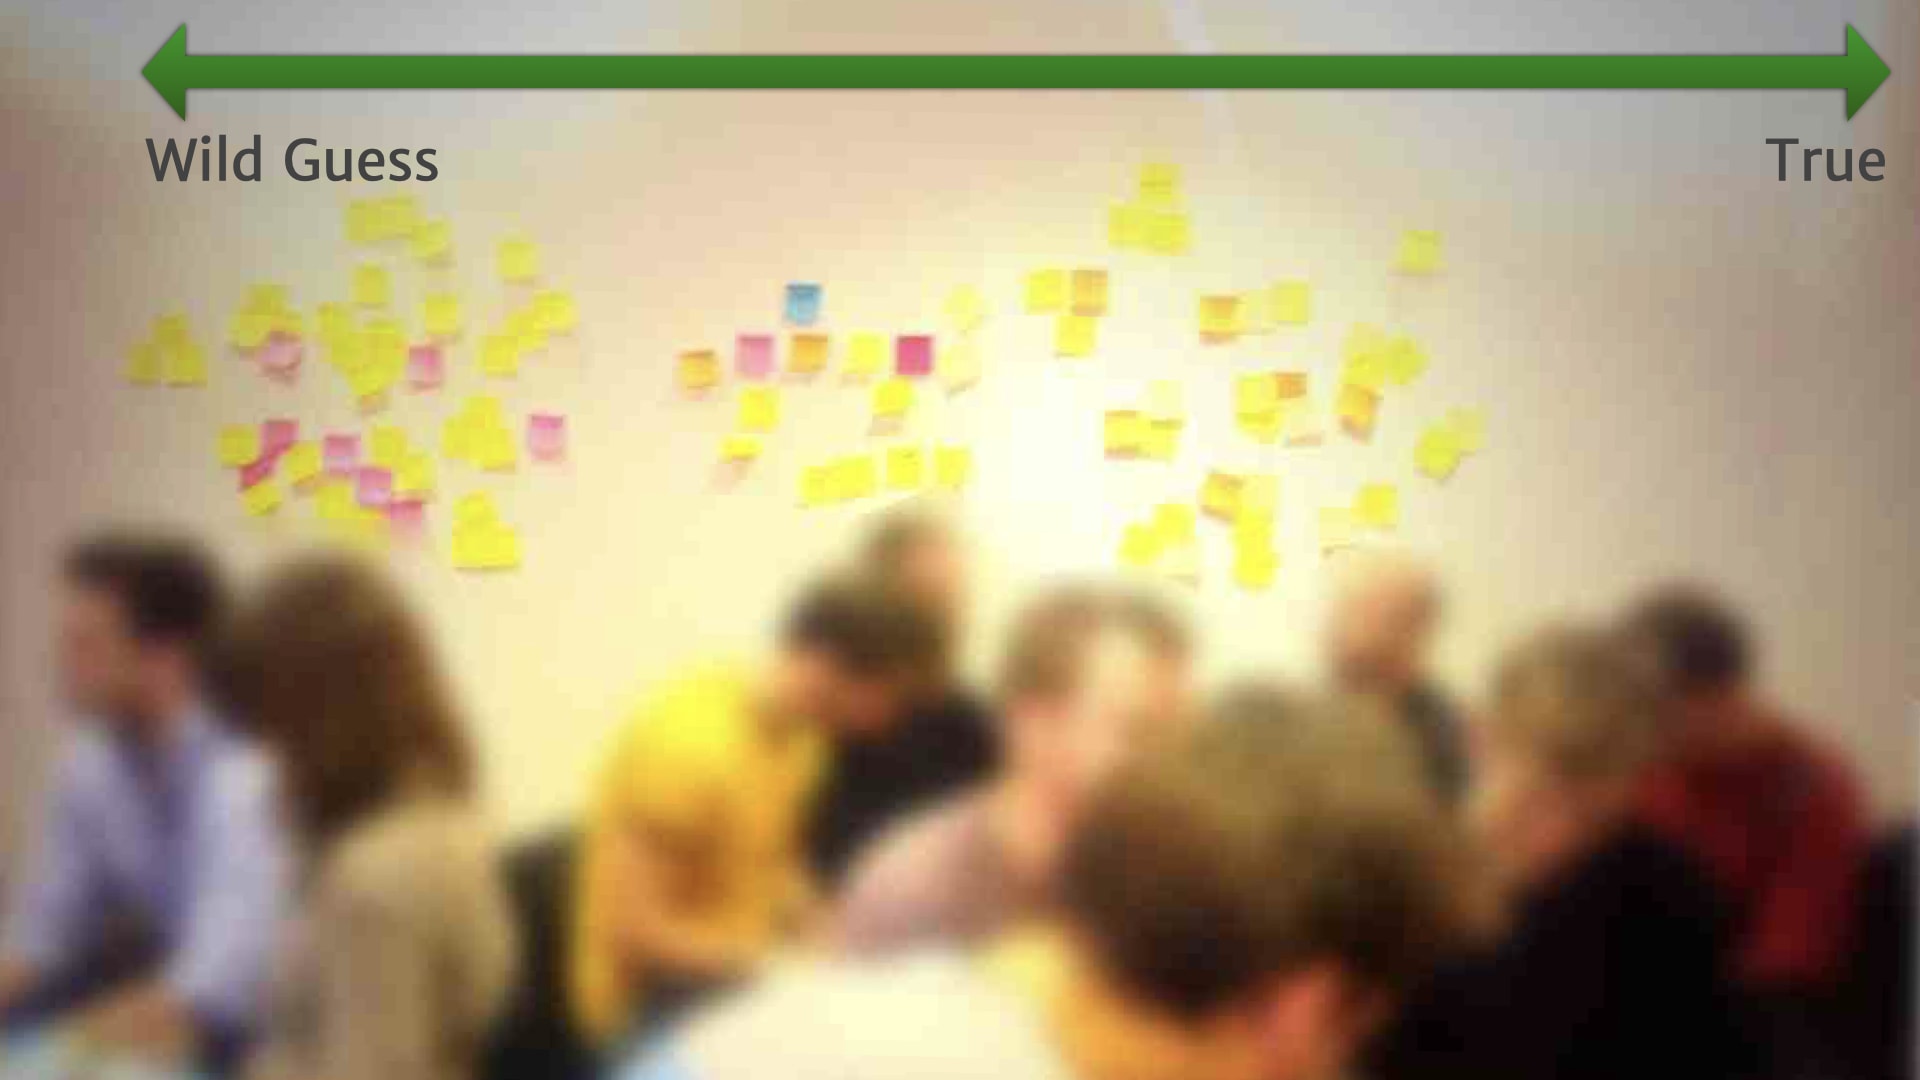 A repeat of the Scale of Truthiness illustration: A photo of a group of people in front of a wall with lots of post-it notes on. The people have been blurred out. Above the post-it notes there is a scale that goes from 'Wild Guess' on the left to 'True' on the right.